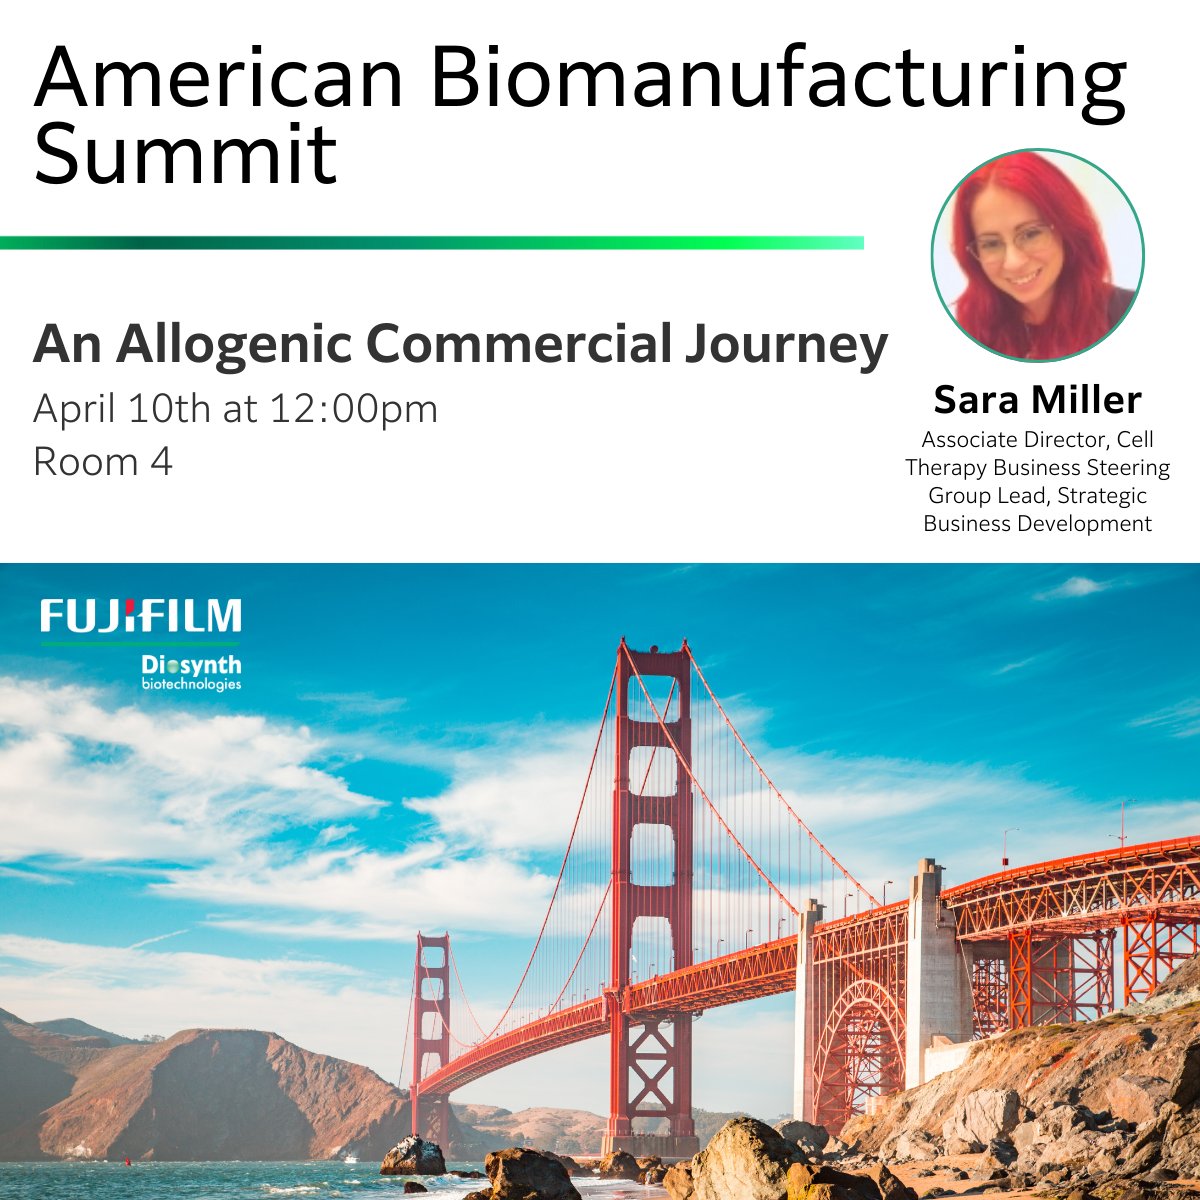 🔬 Attending the American Biomanufacturing Summit? Don't miss out on a workshop with Sara Miller, Associate Director of Cell Therapy Business, will be speaking on 'AN ALLOGENEIC COMMERCIAL JOURNEY' on April 10th at 12 PM. #Biomanufacturing #Innovation #CellTherapy